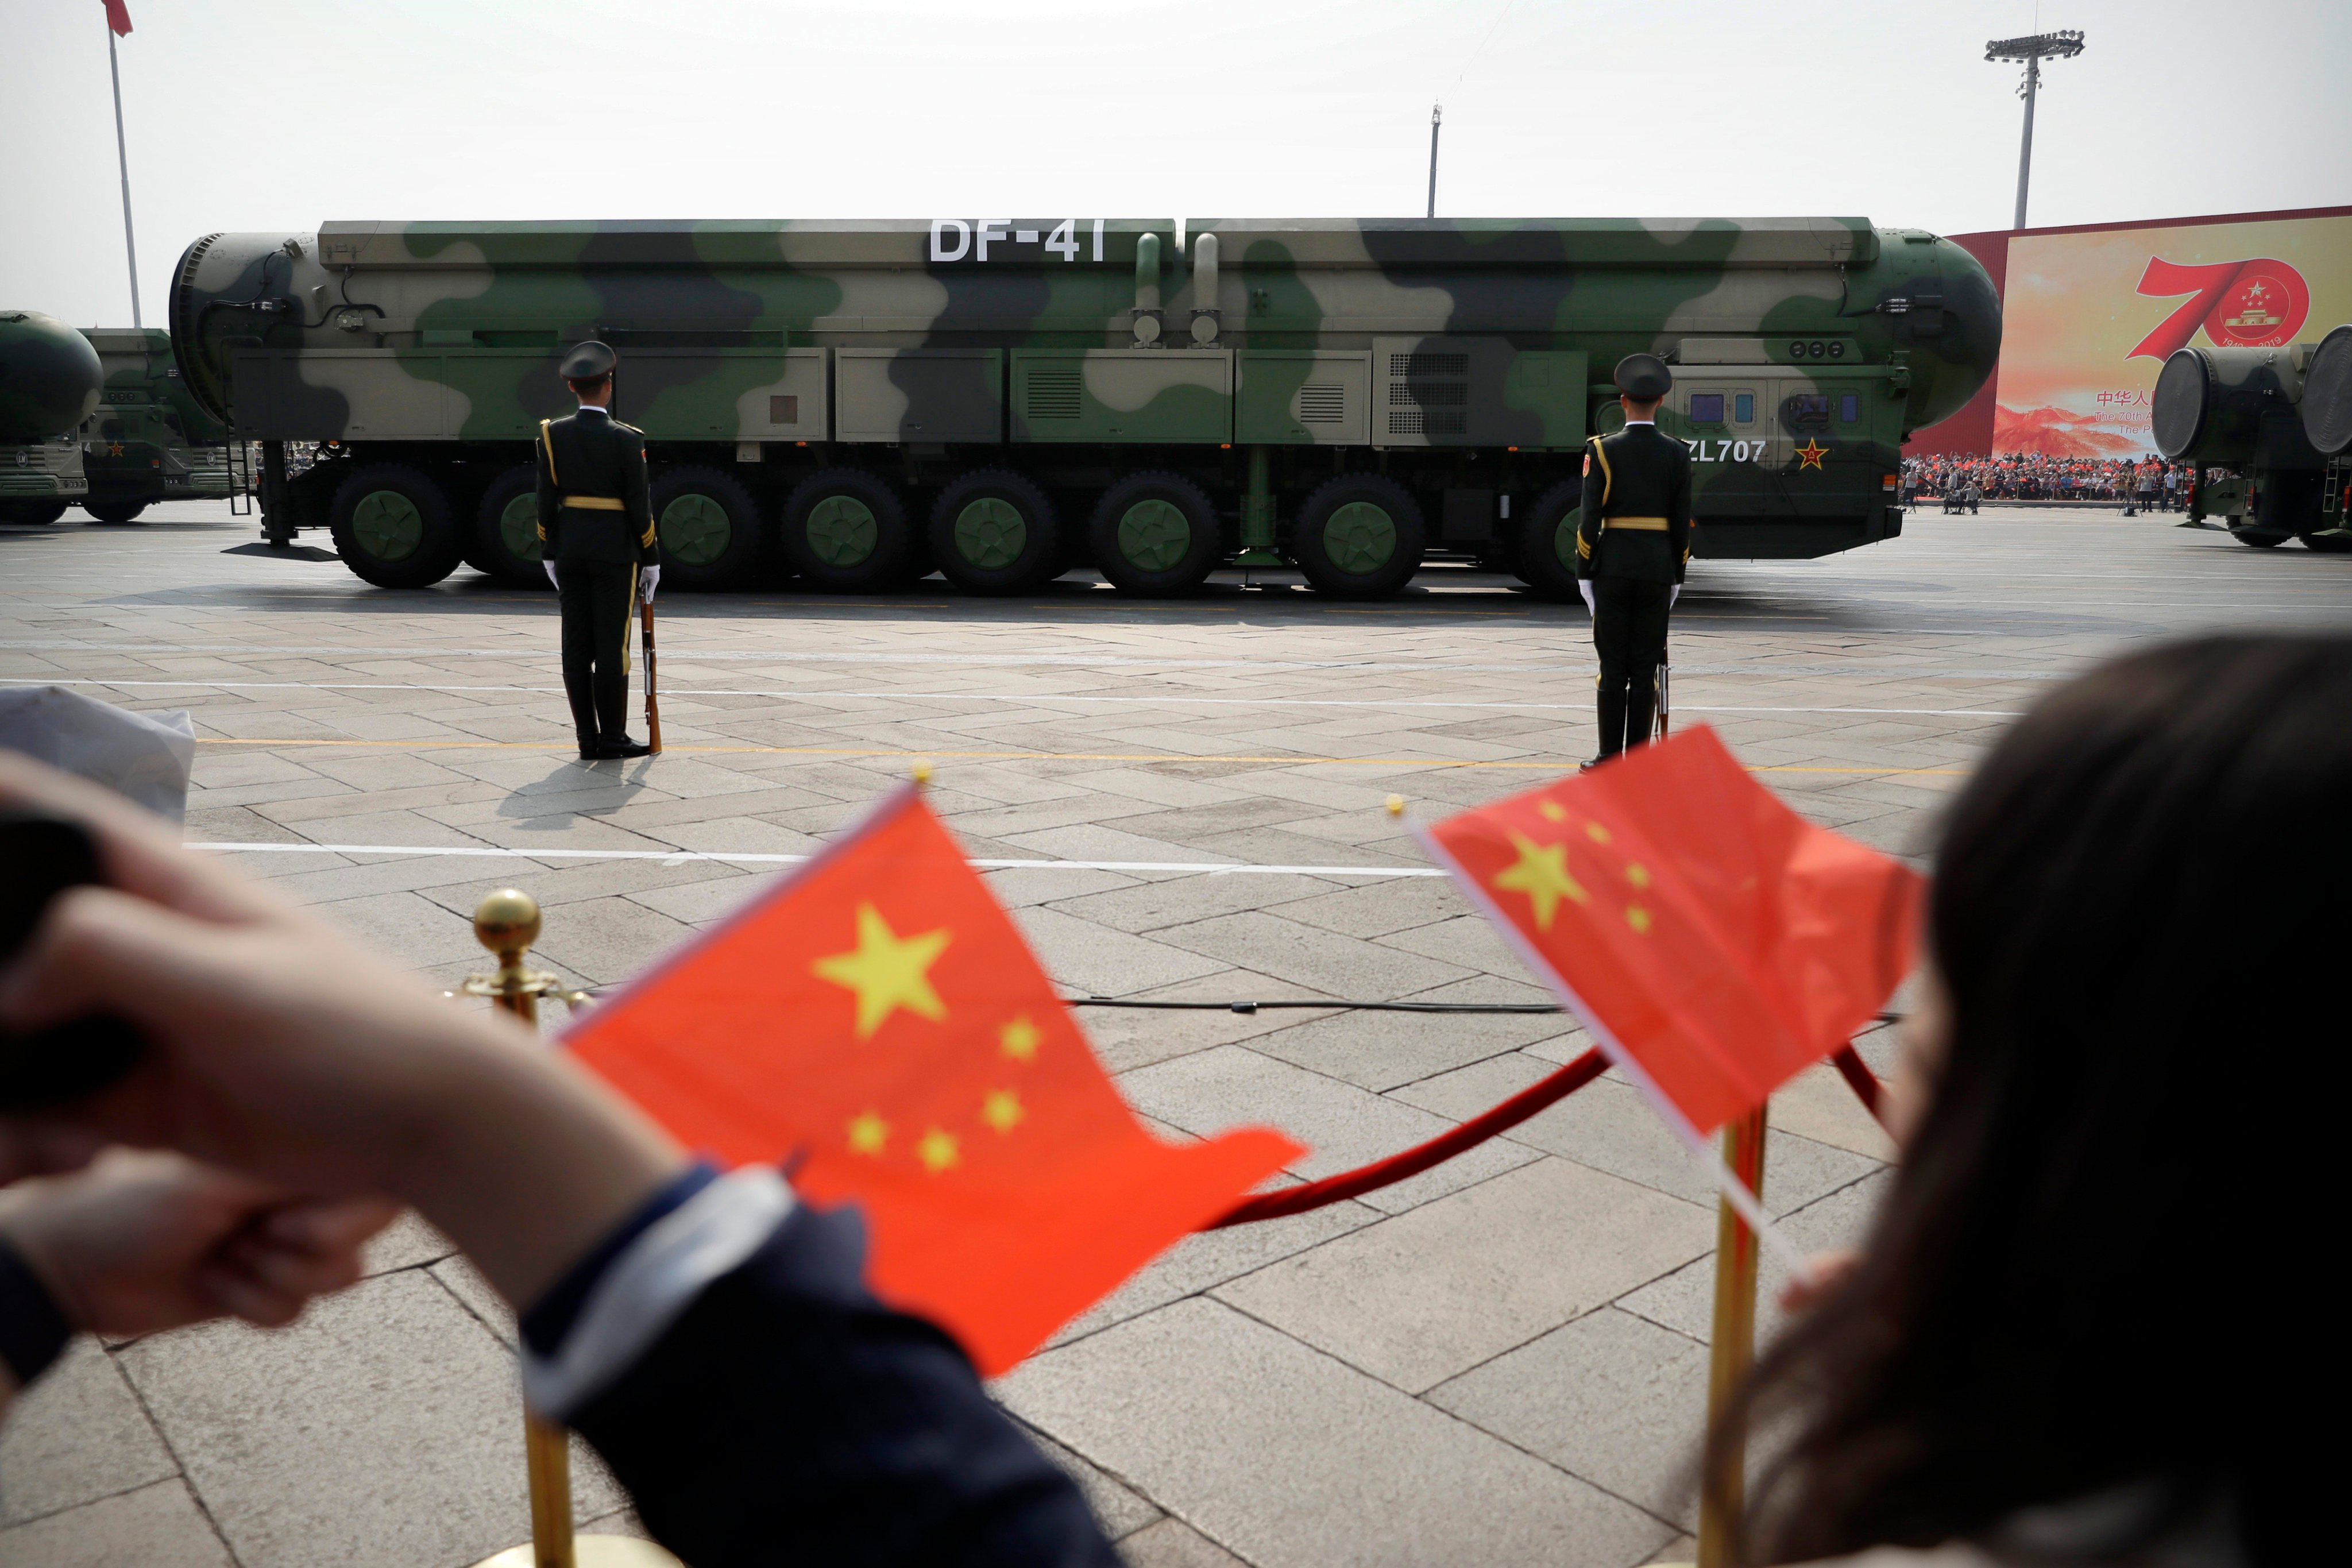 China has not said how many nuclear warheads it has, but the US thinks the number is around 500. Photo: AP